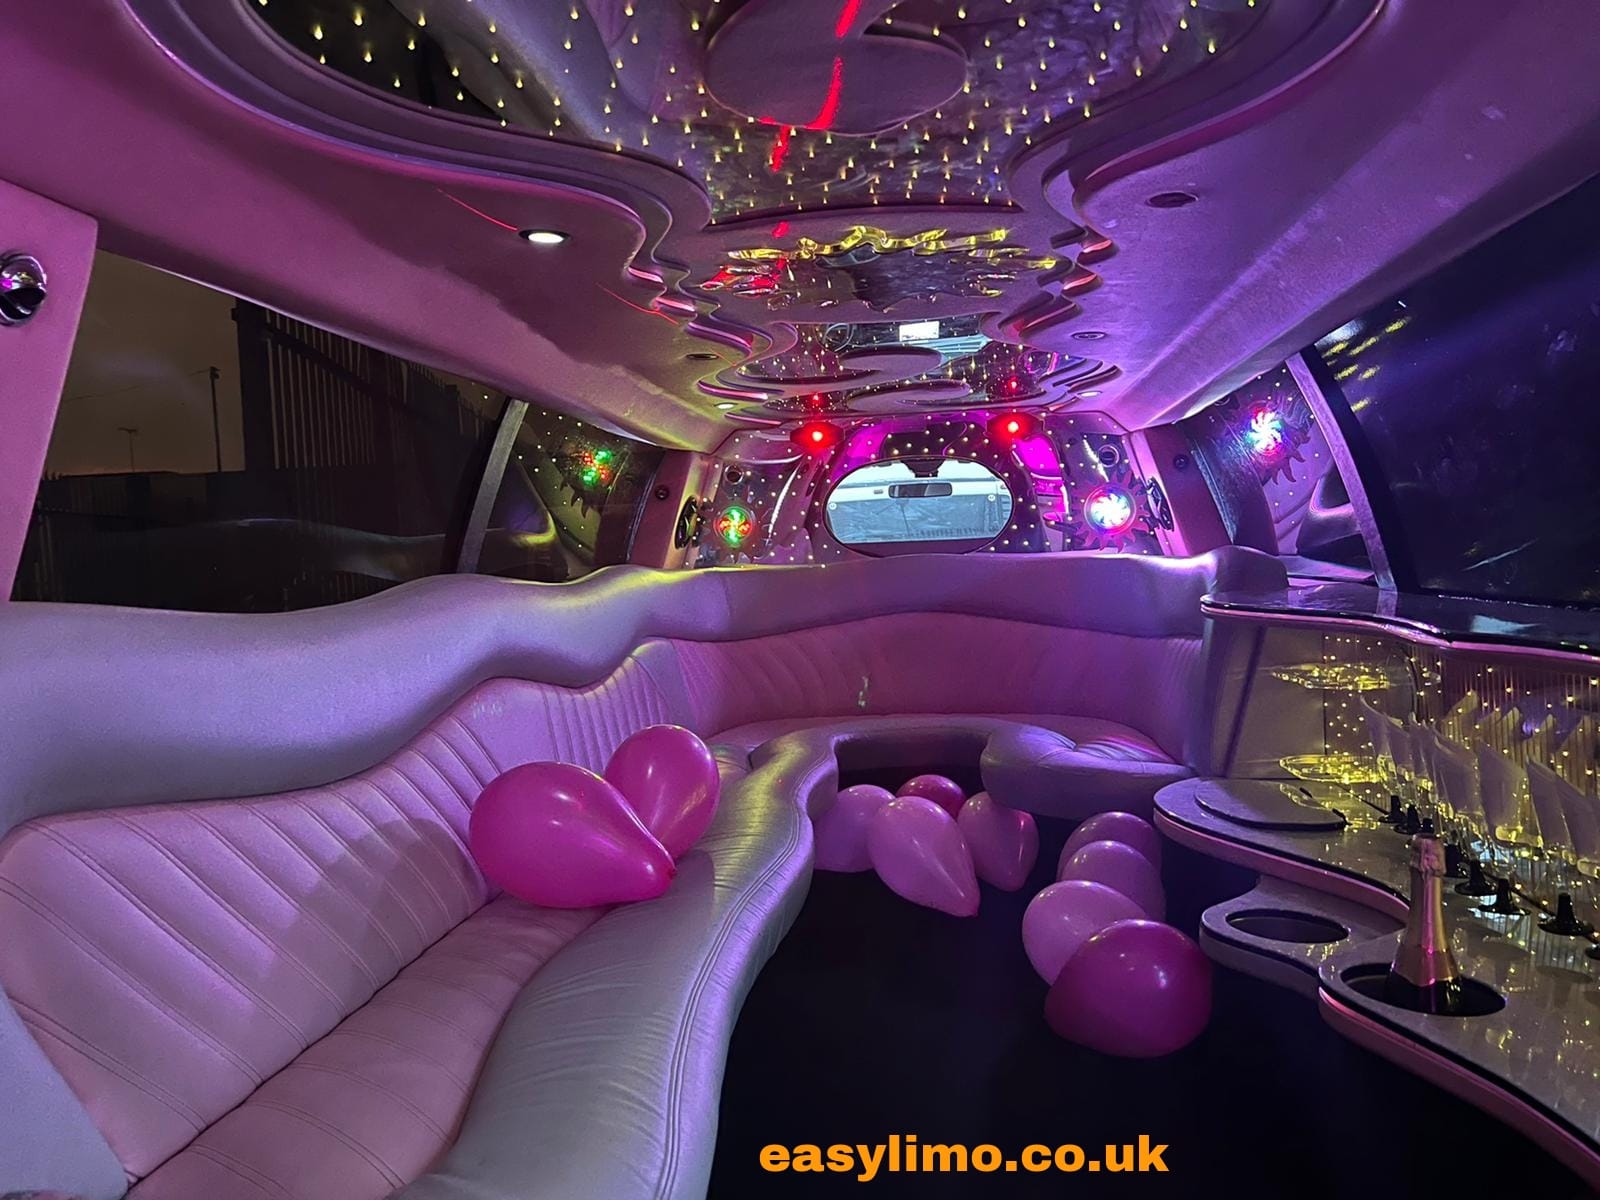 #1 Rated Kids Limo For Hire Service in London